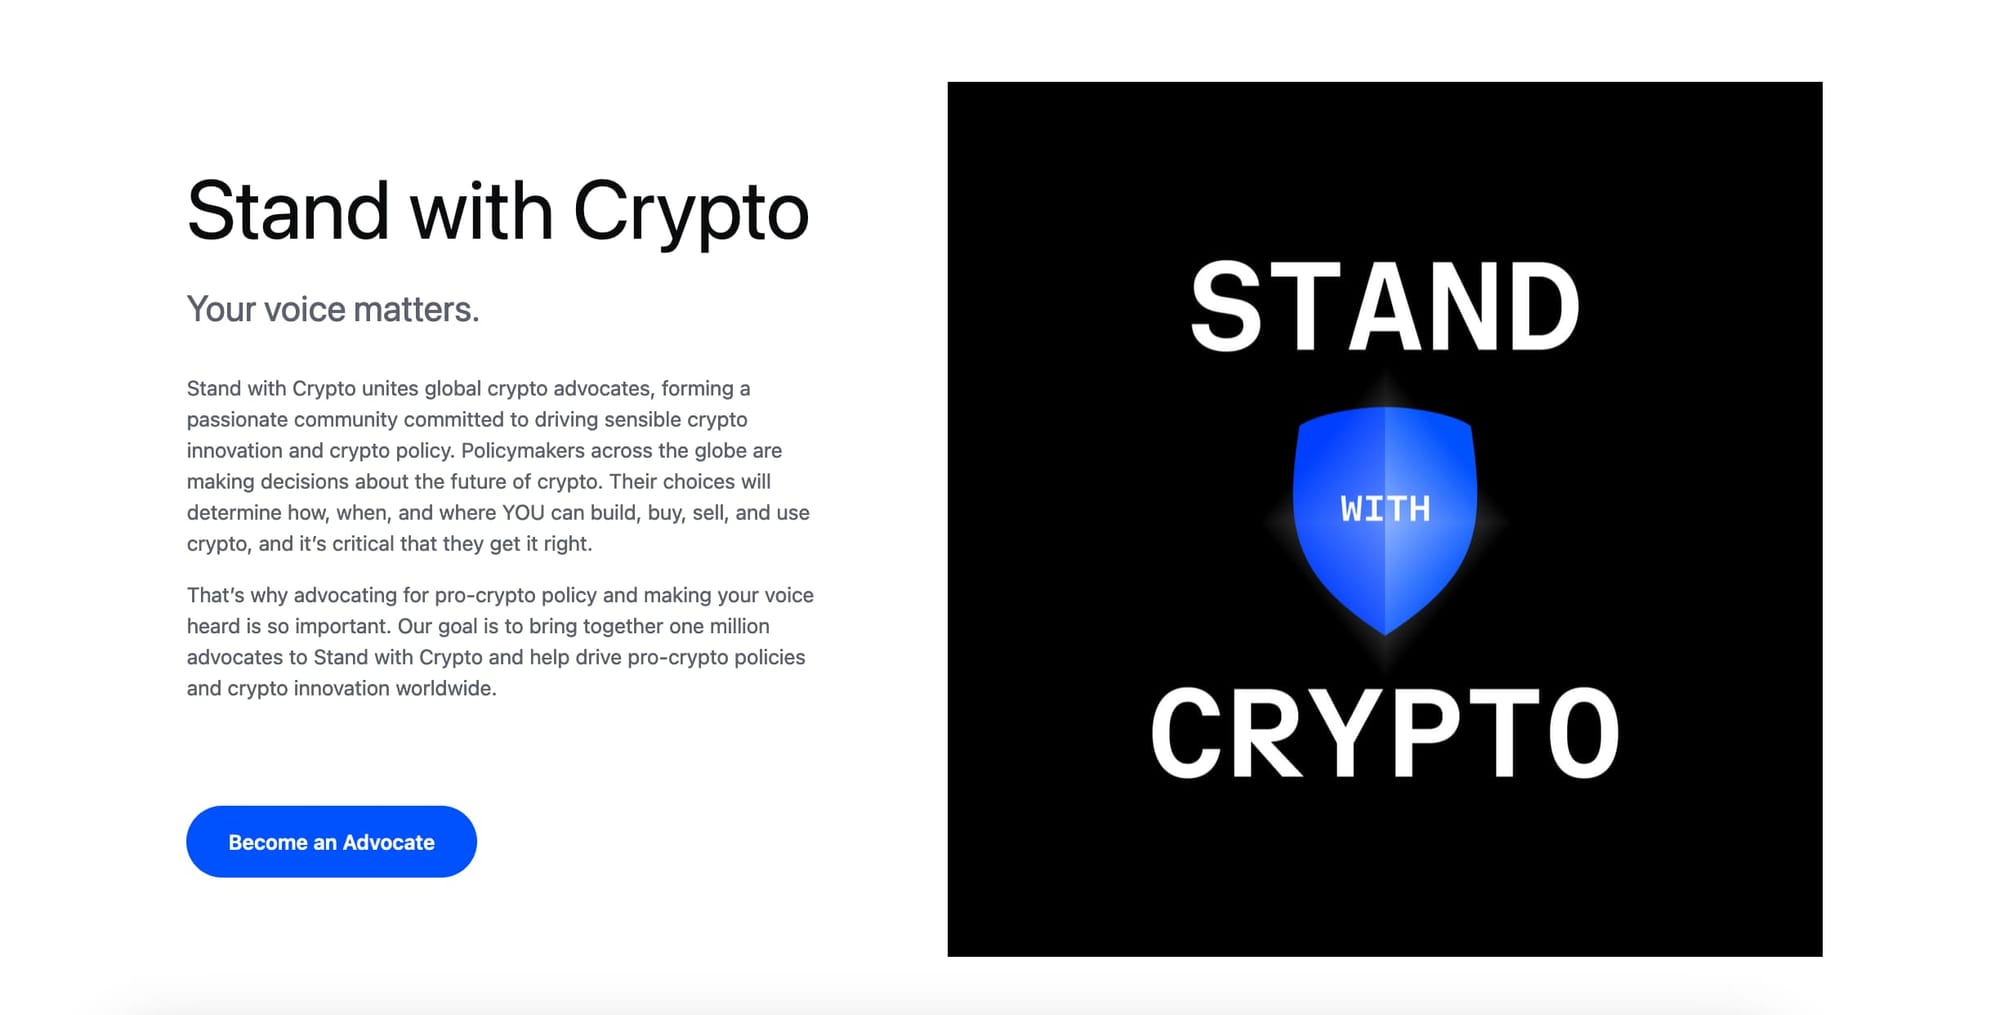 COINBASE ADVOCACY EFFORTS - STAND WITH CRYPTO